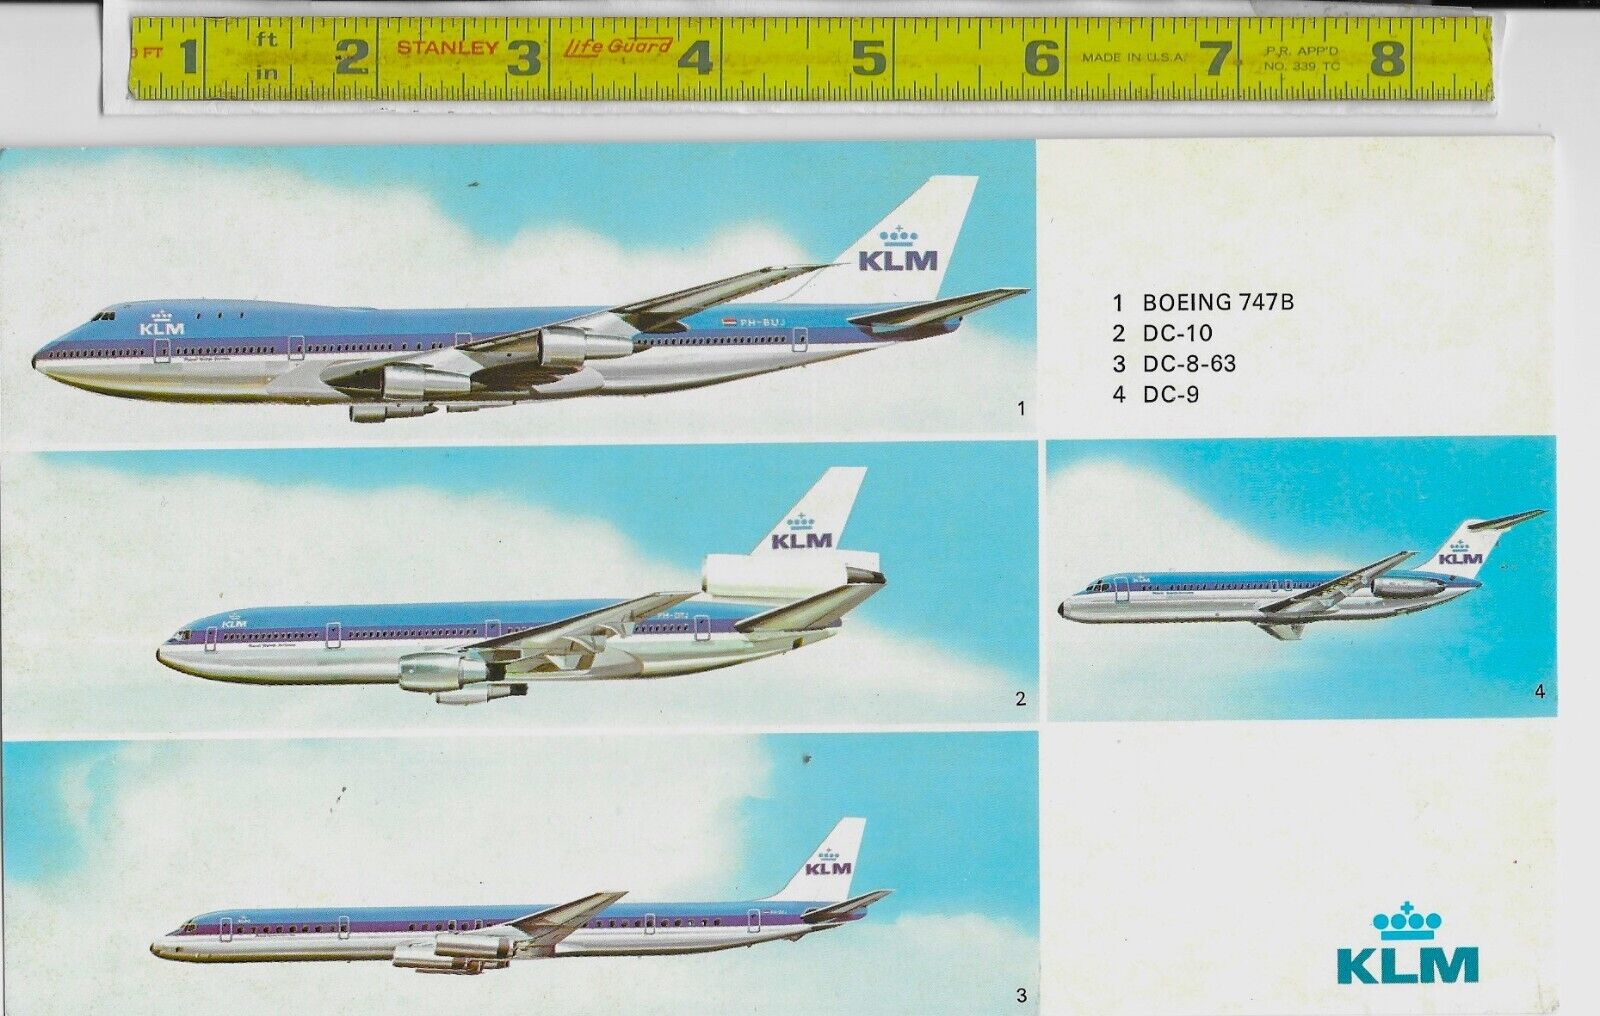 Large KLM, DC-9, DC-8-63, DC-10, 747B Postcard, Airline issued